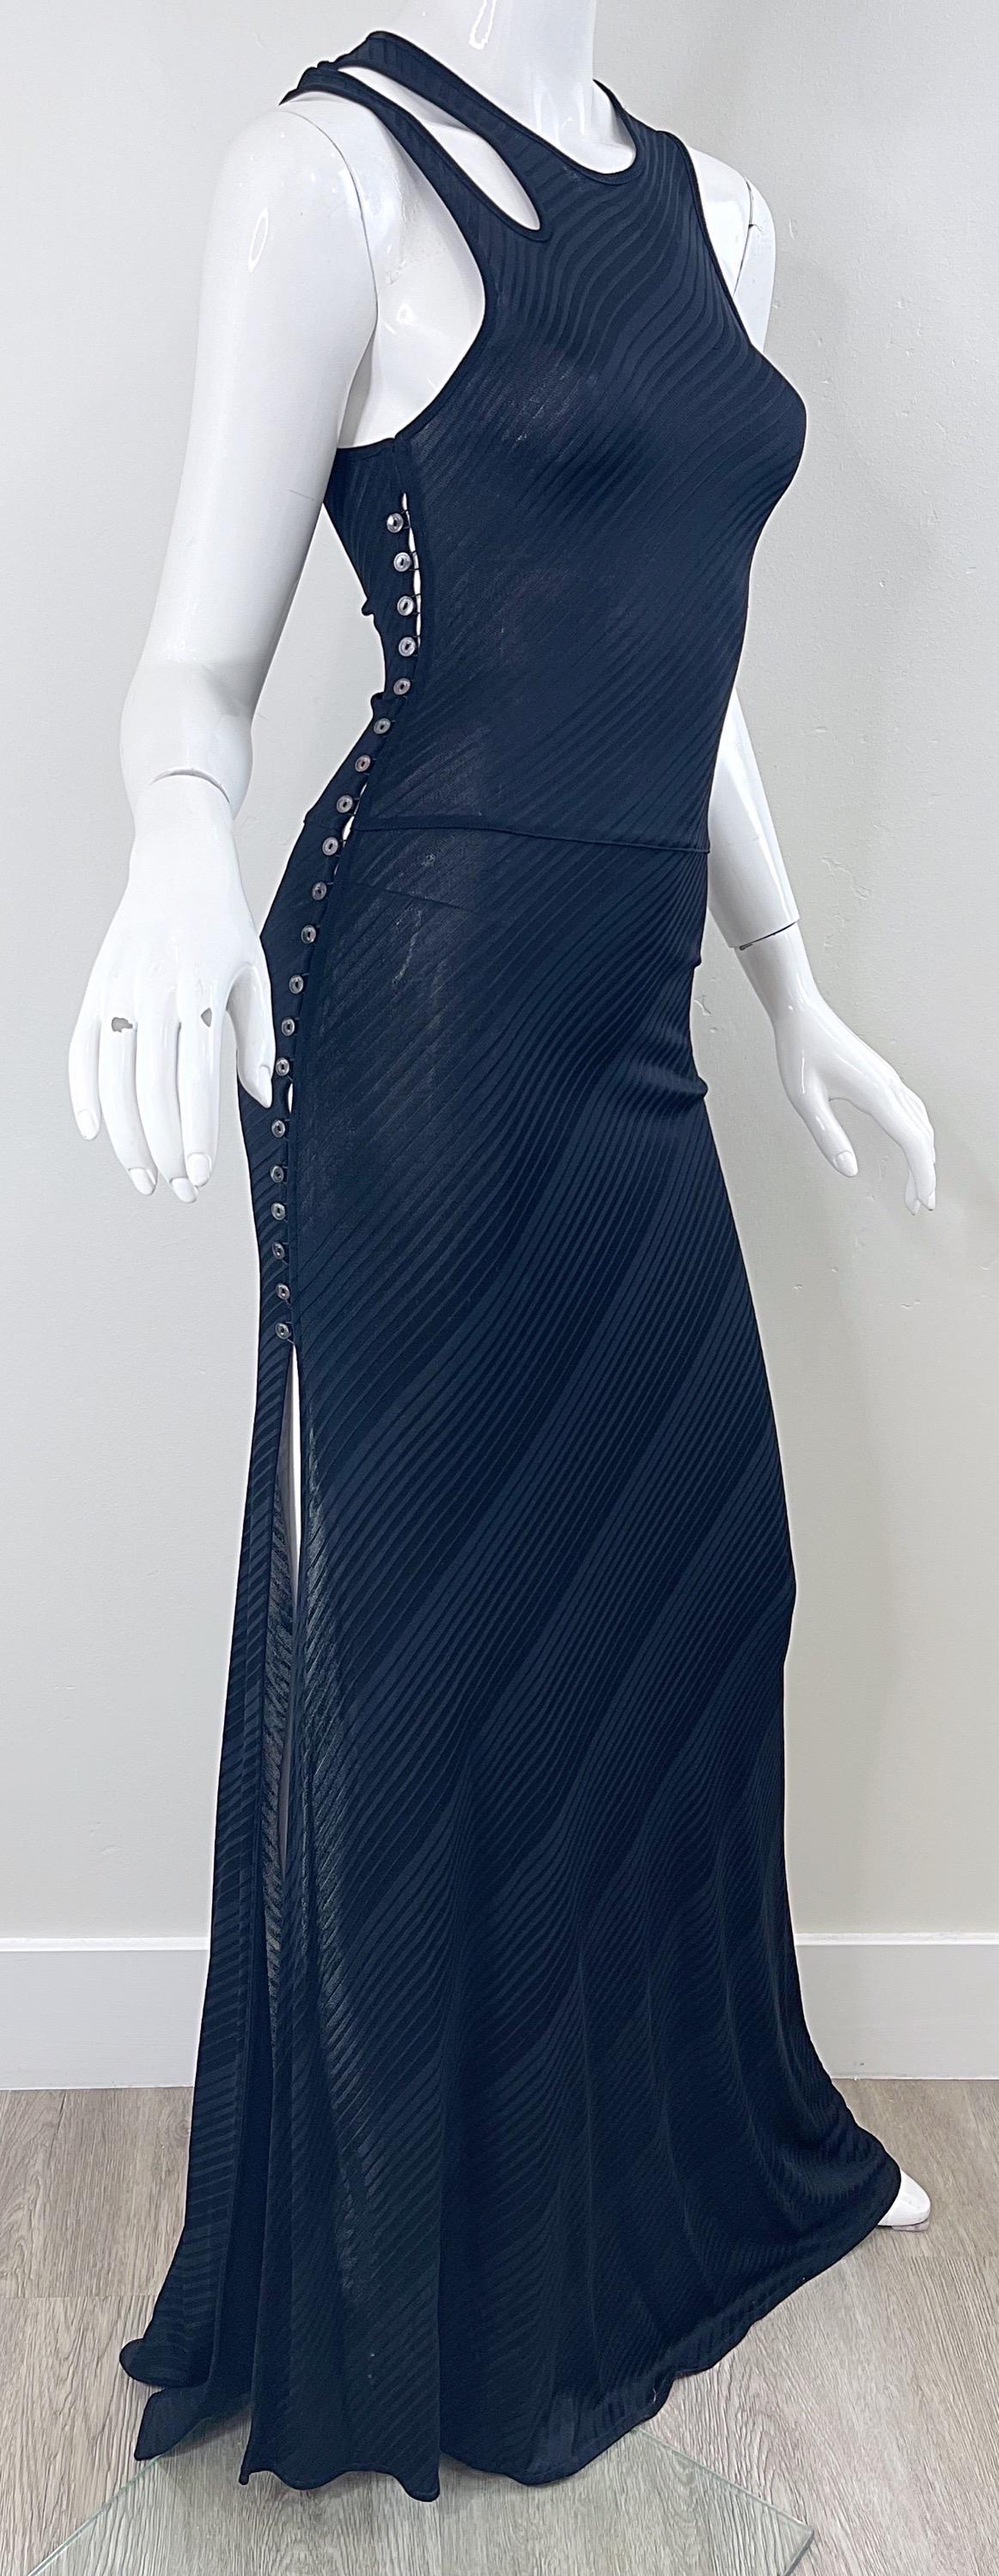 Gianni Versace Versus Spring 2001 Black Cut Out Sleeveless Vintage Jersey Gown  For Sale 3